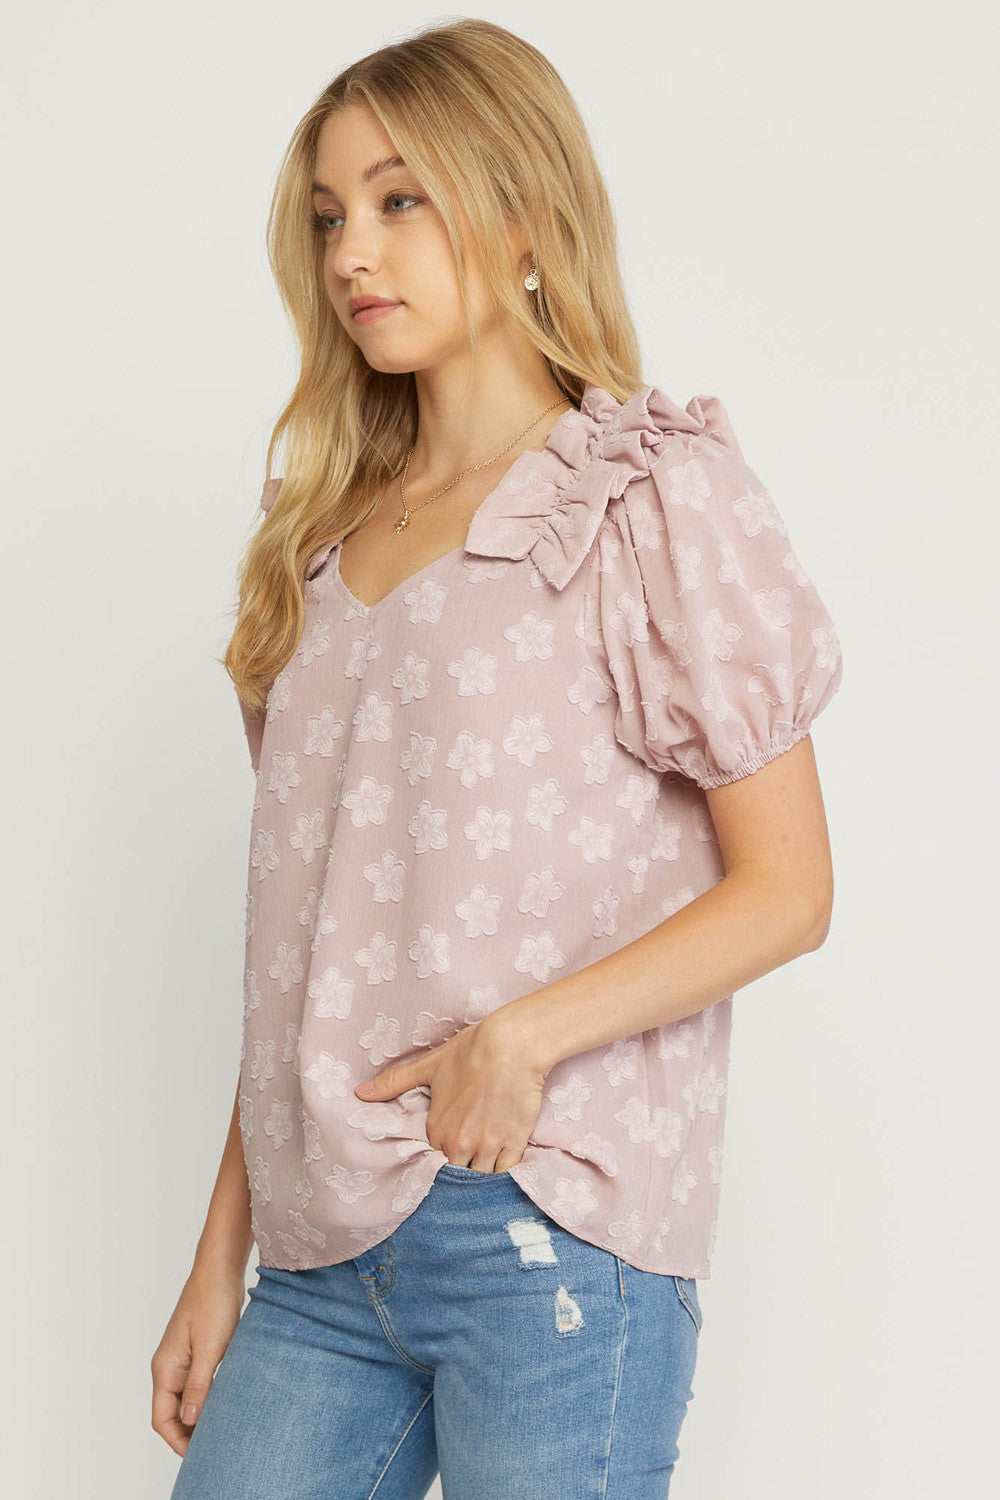 Textured Puff Sleeve Top with Ruffle Shoulder Detail by Entro Clothing